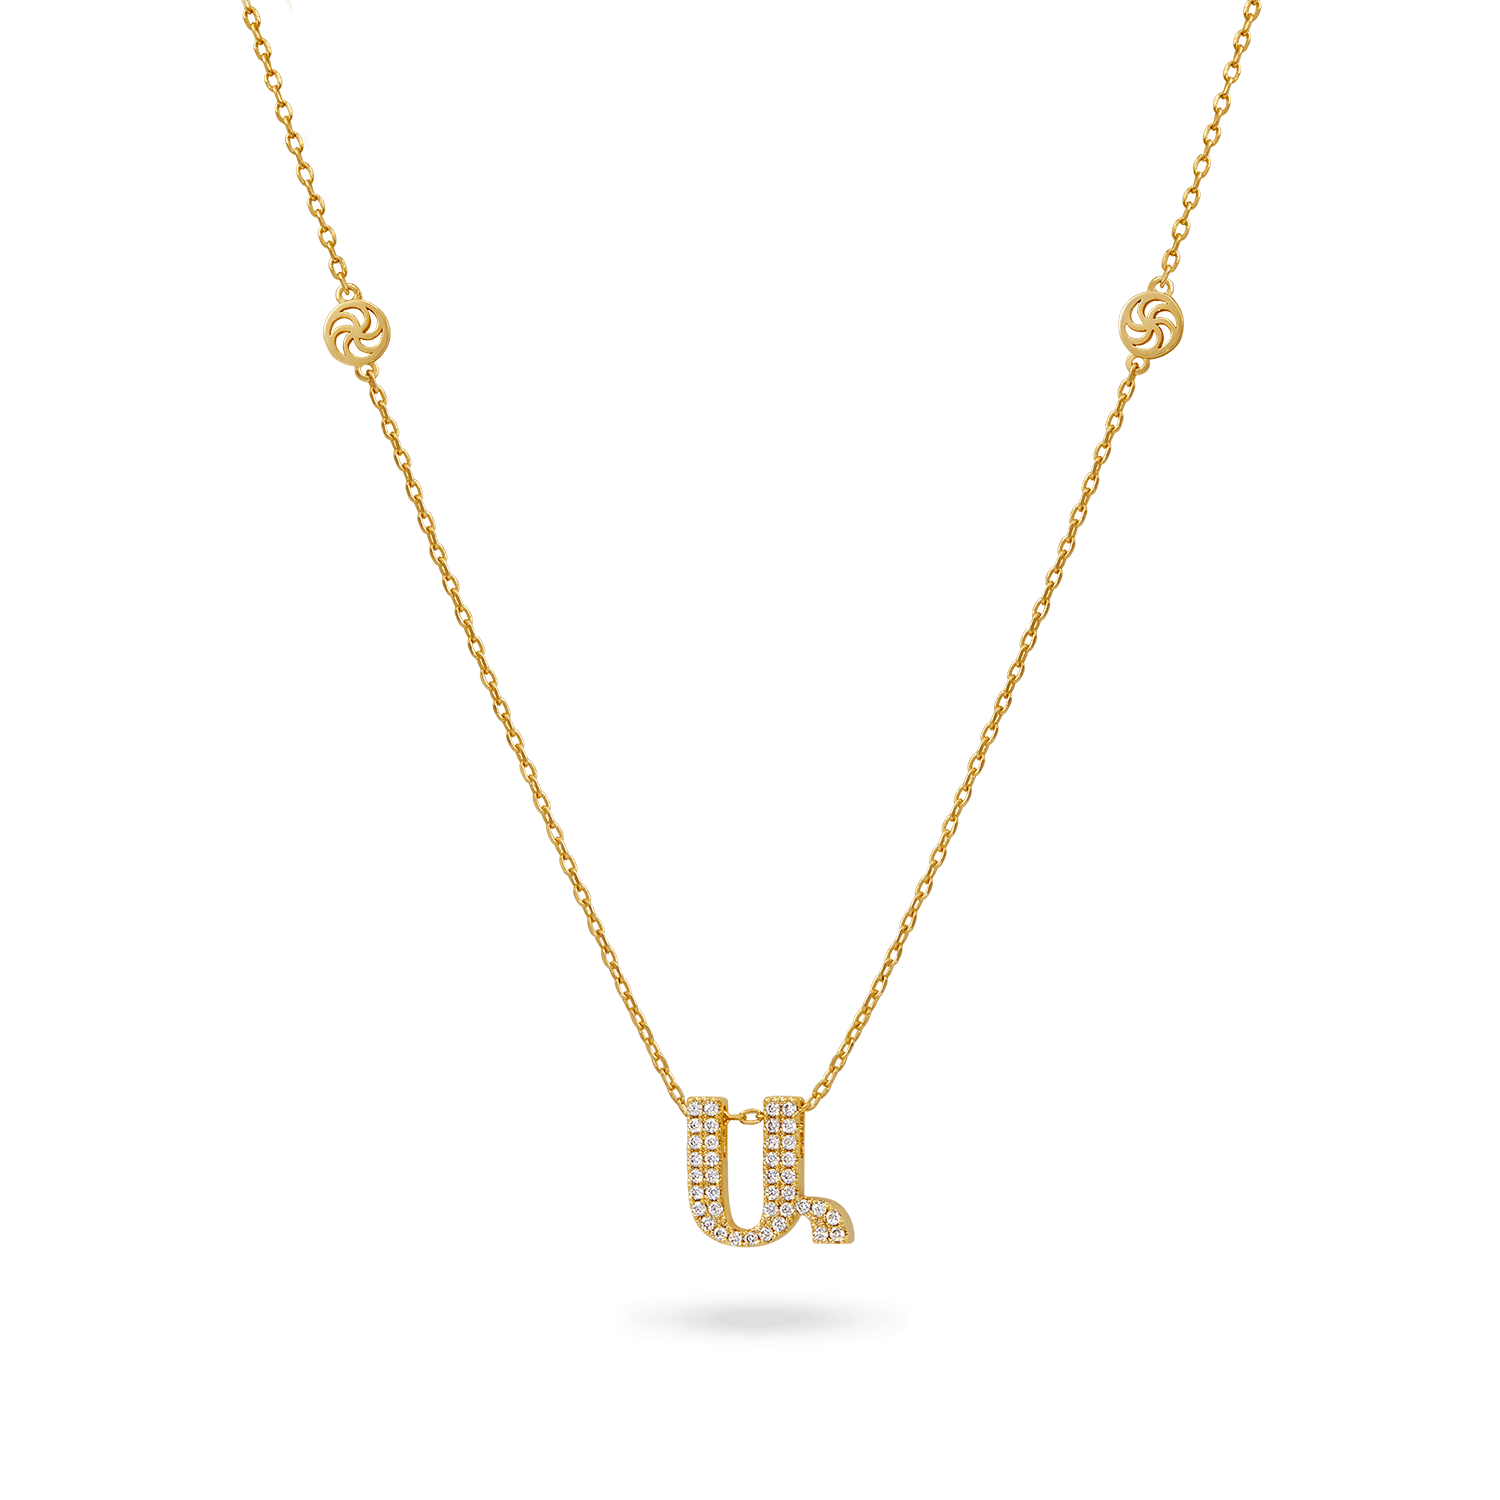 Armenian Initial Necklace Necklaces IceLink-ATL Ա (Ani)  